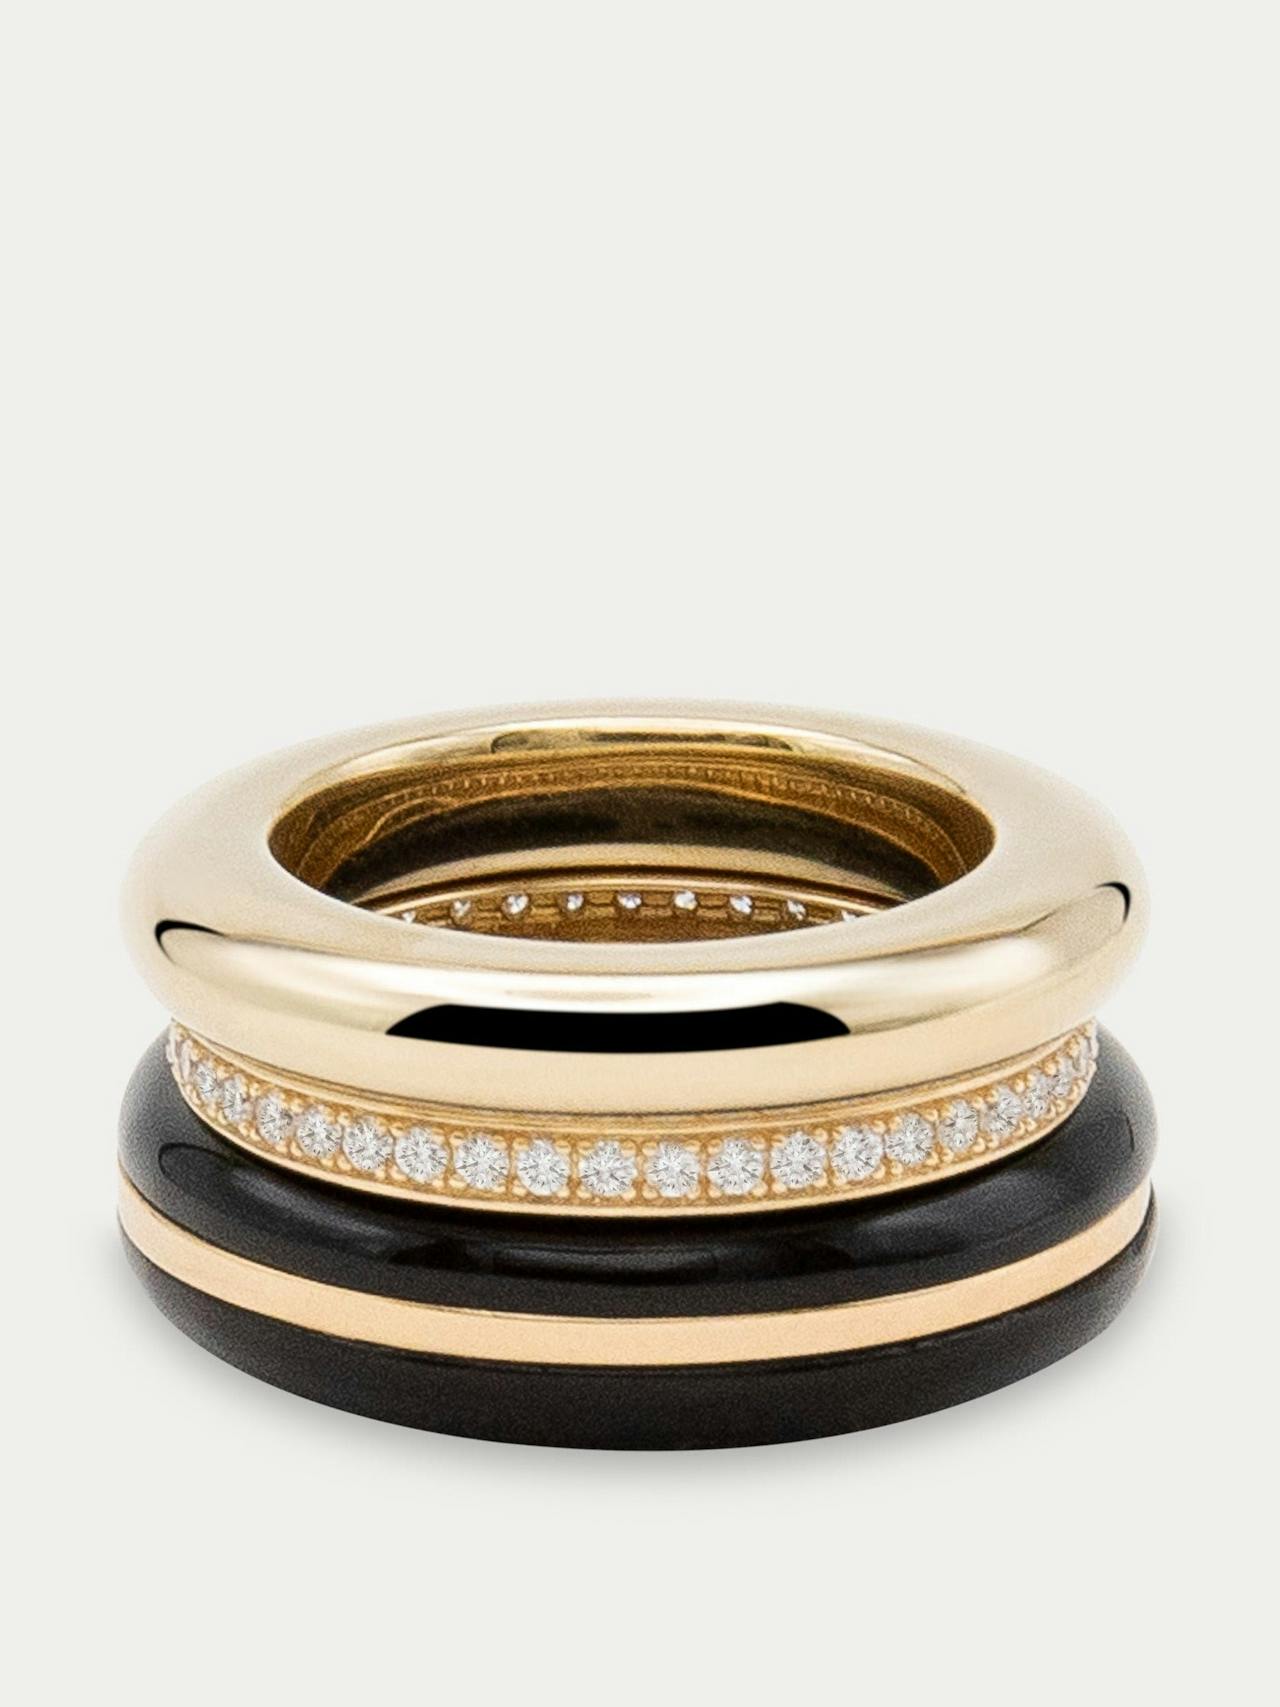 Black onyx classic stacking ring